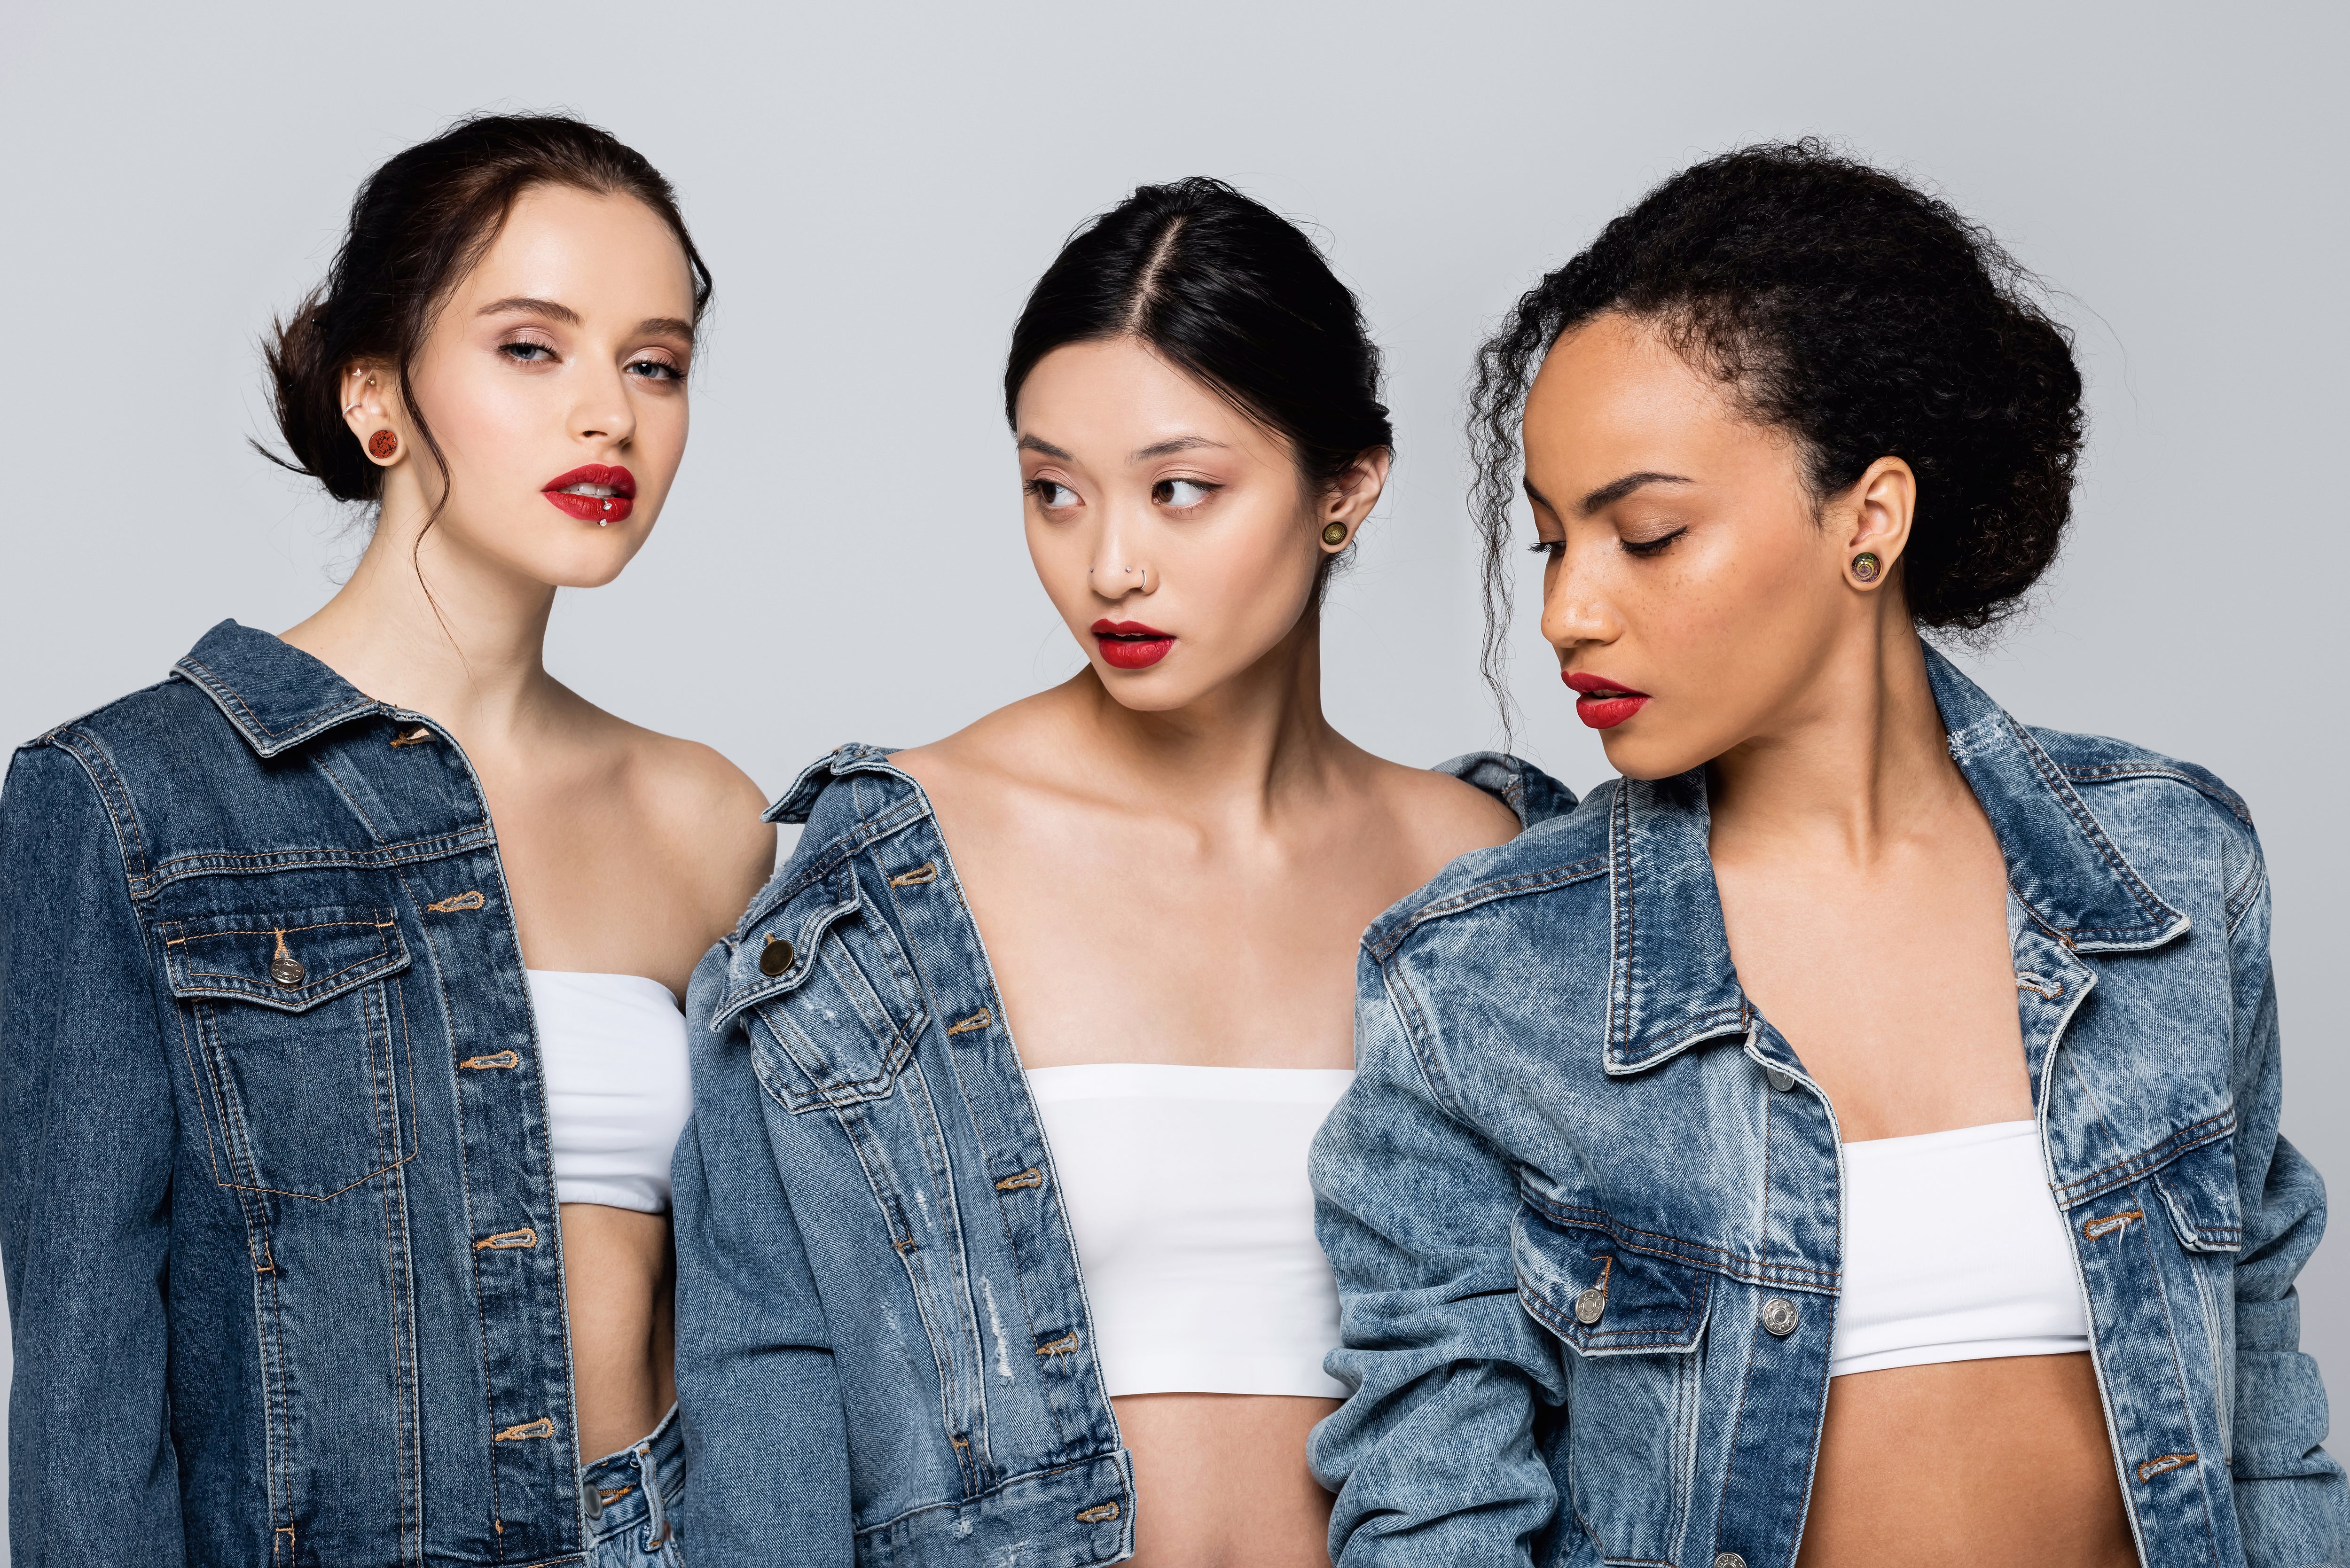 Three young women wear matching denim jackets and body piercing jewelry from bm25 for womens history month